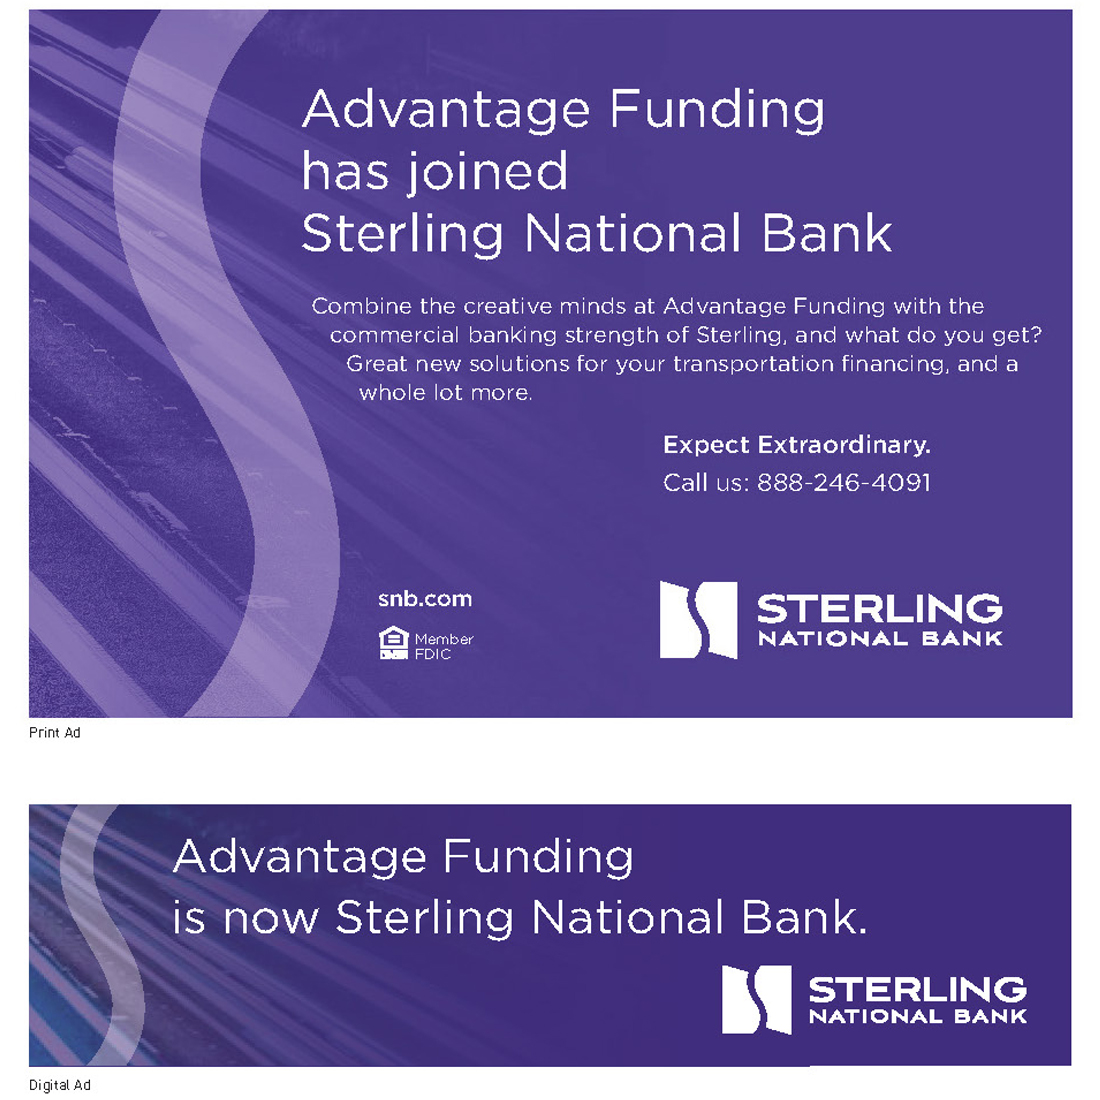 Print and digital ads with the phrase "Advantage Funding has joined Sterling National Bank"